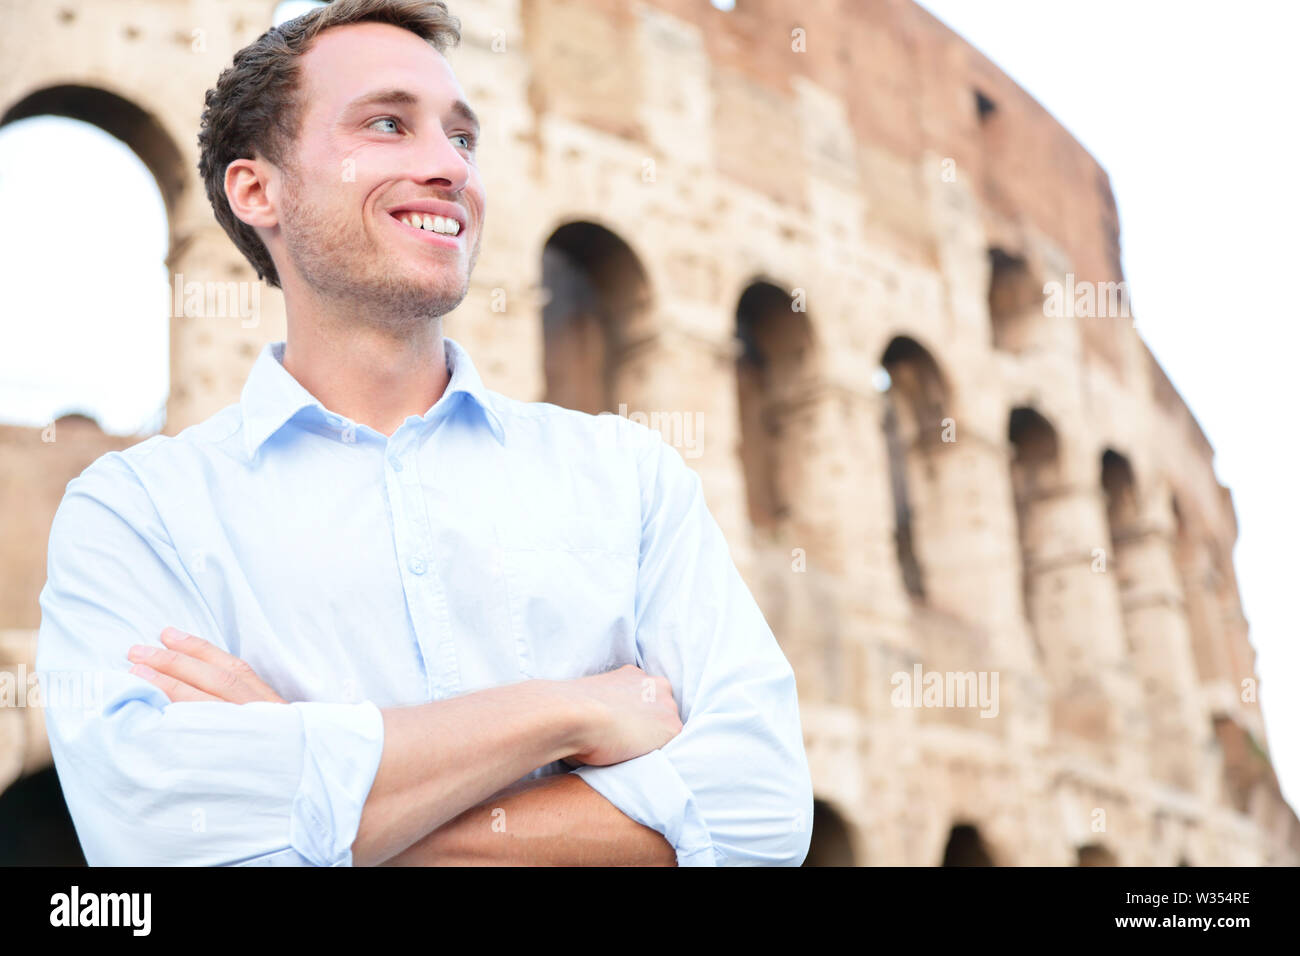 Young casual business man portrait by Colosseum, Rome, Italy. Proud confident happy smiling cross-armed businessman in shirt standing outdoor looking to side. Male Caucasian man in his 20s. Stock Photo